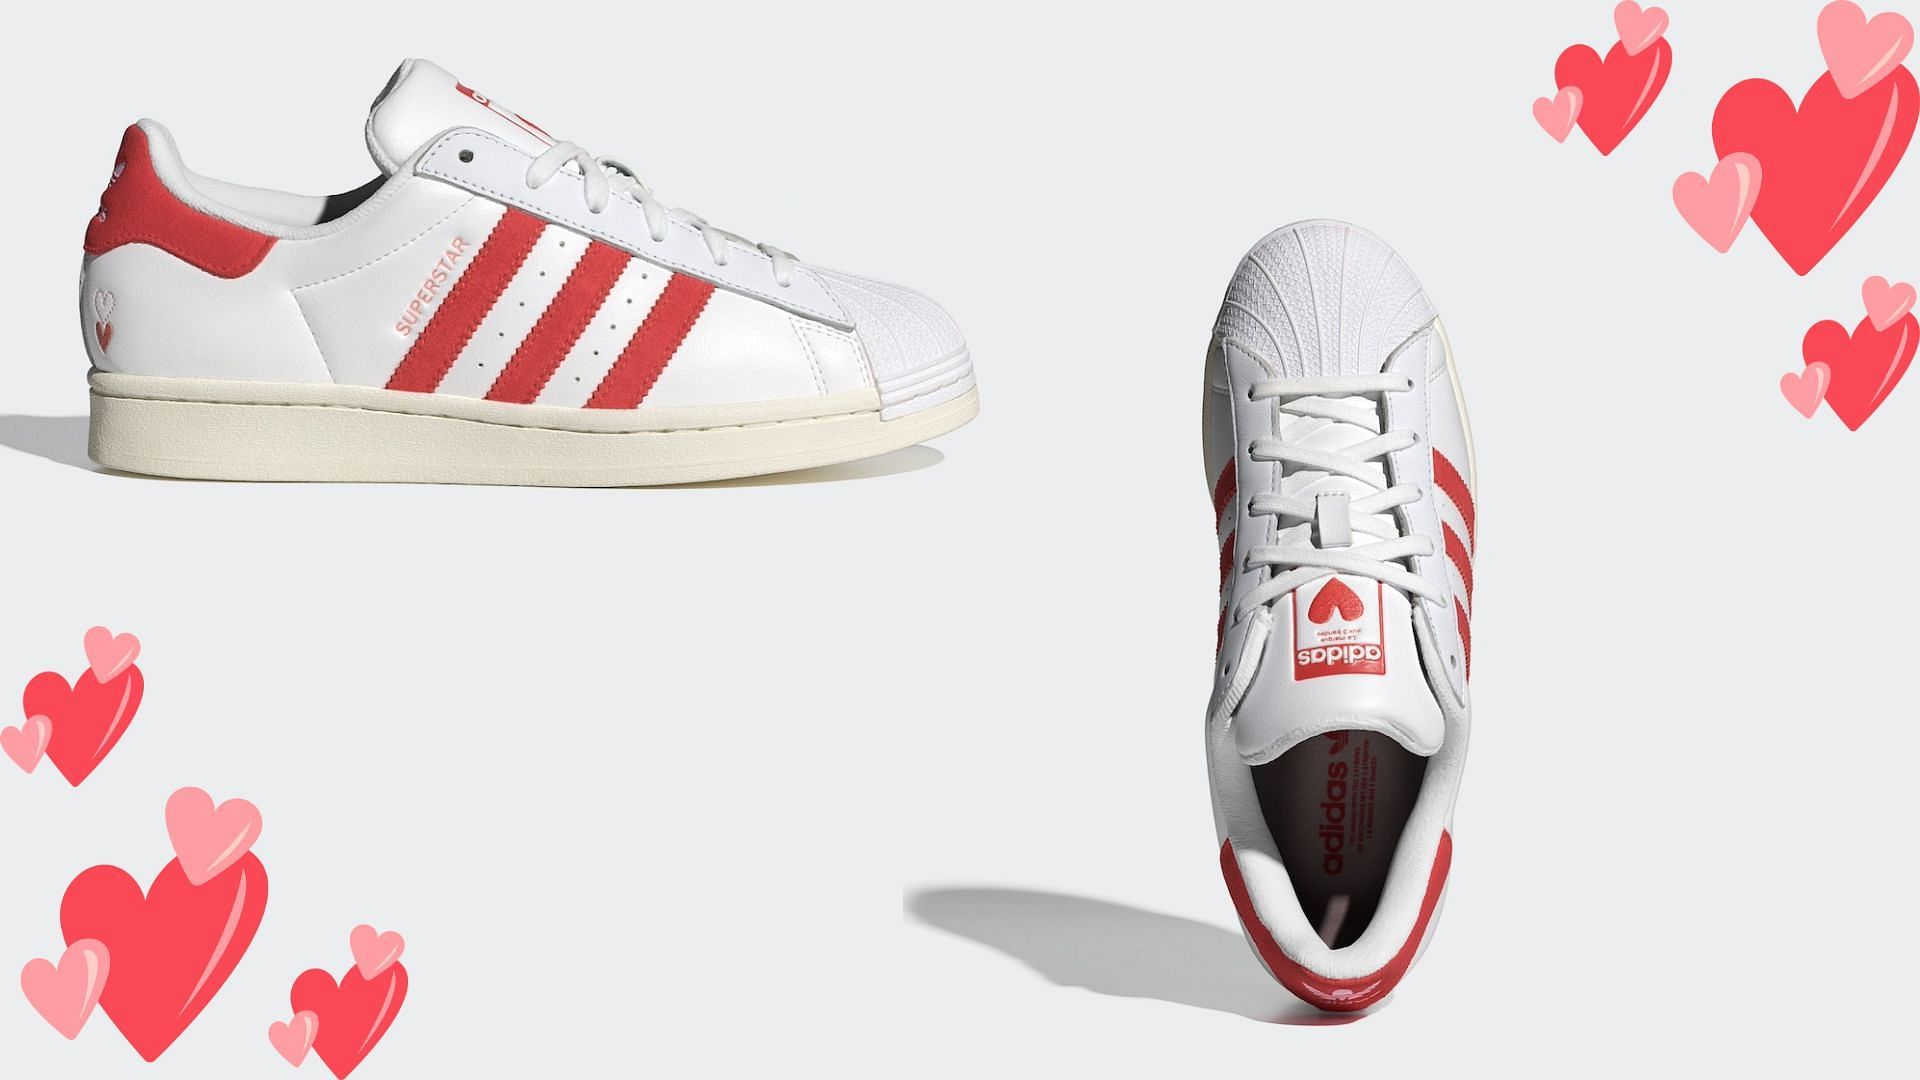 Take a closer look at the sneakers (Image via Adidas)